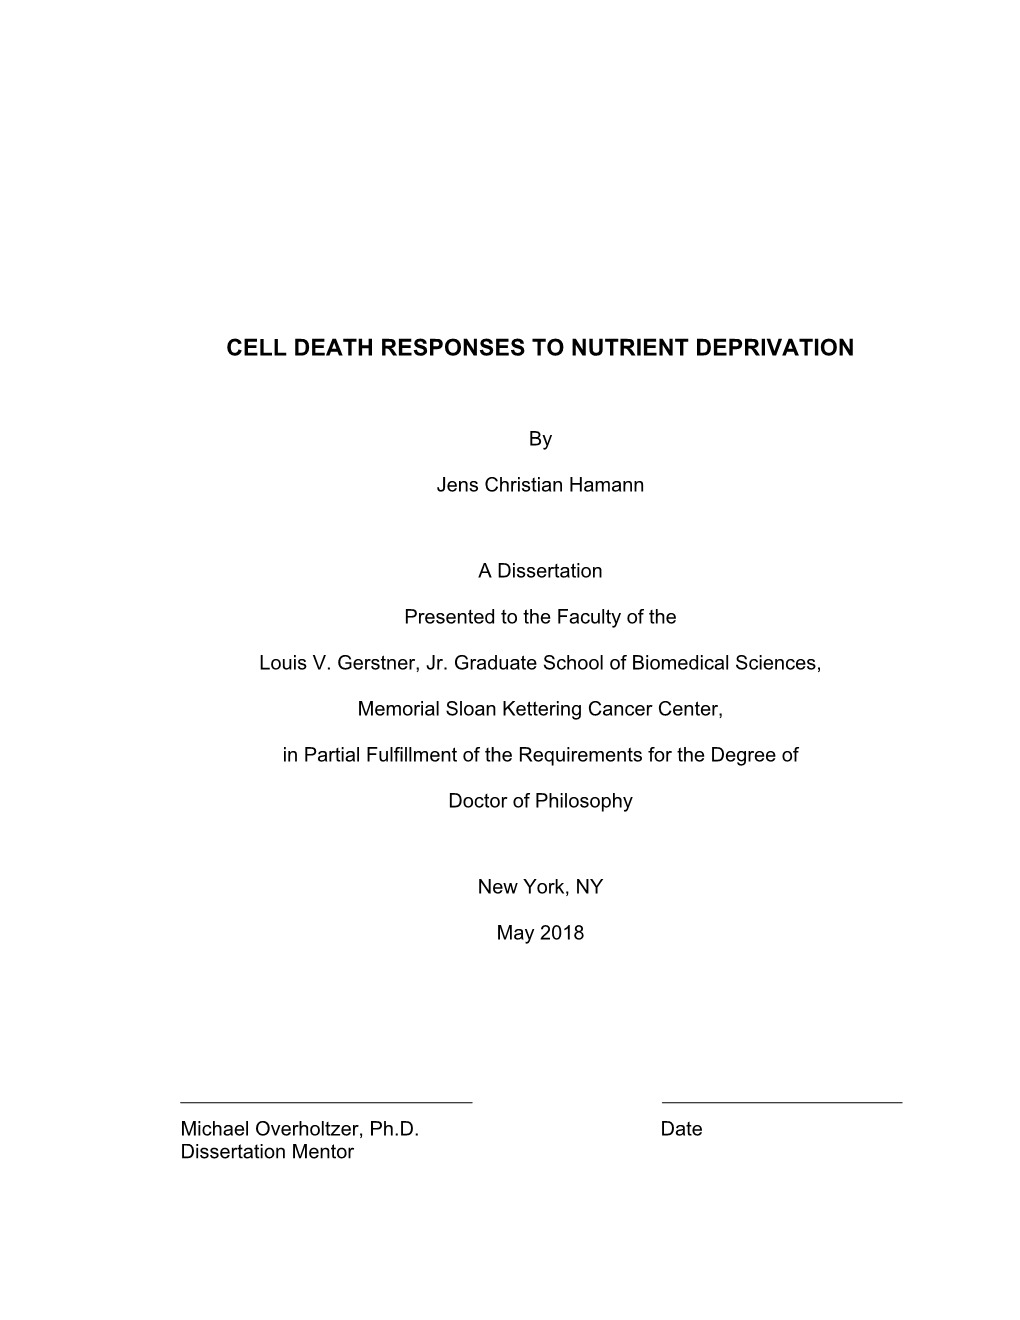 Cell Death Responses to Nutrient Deprivation (2018)